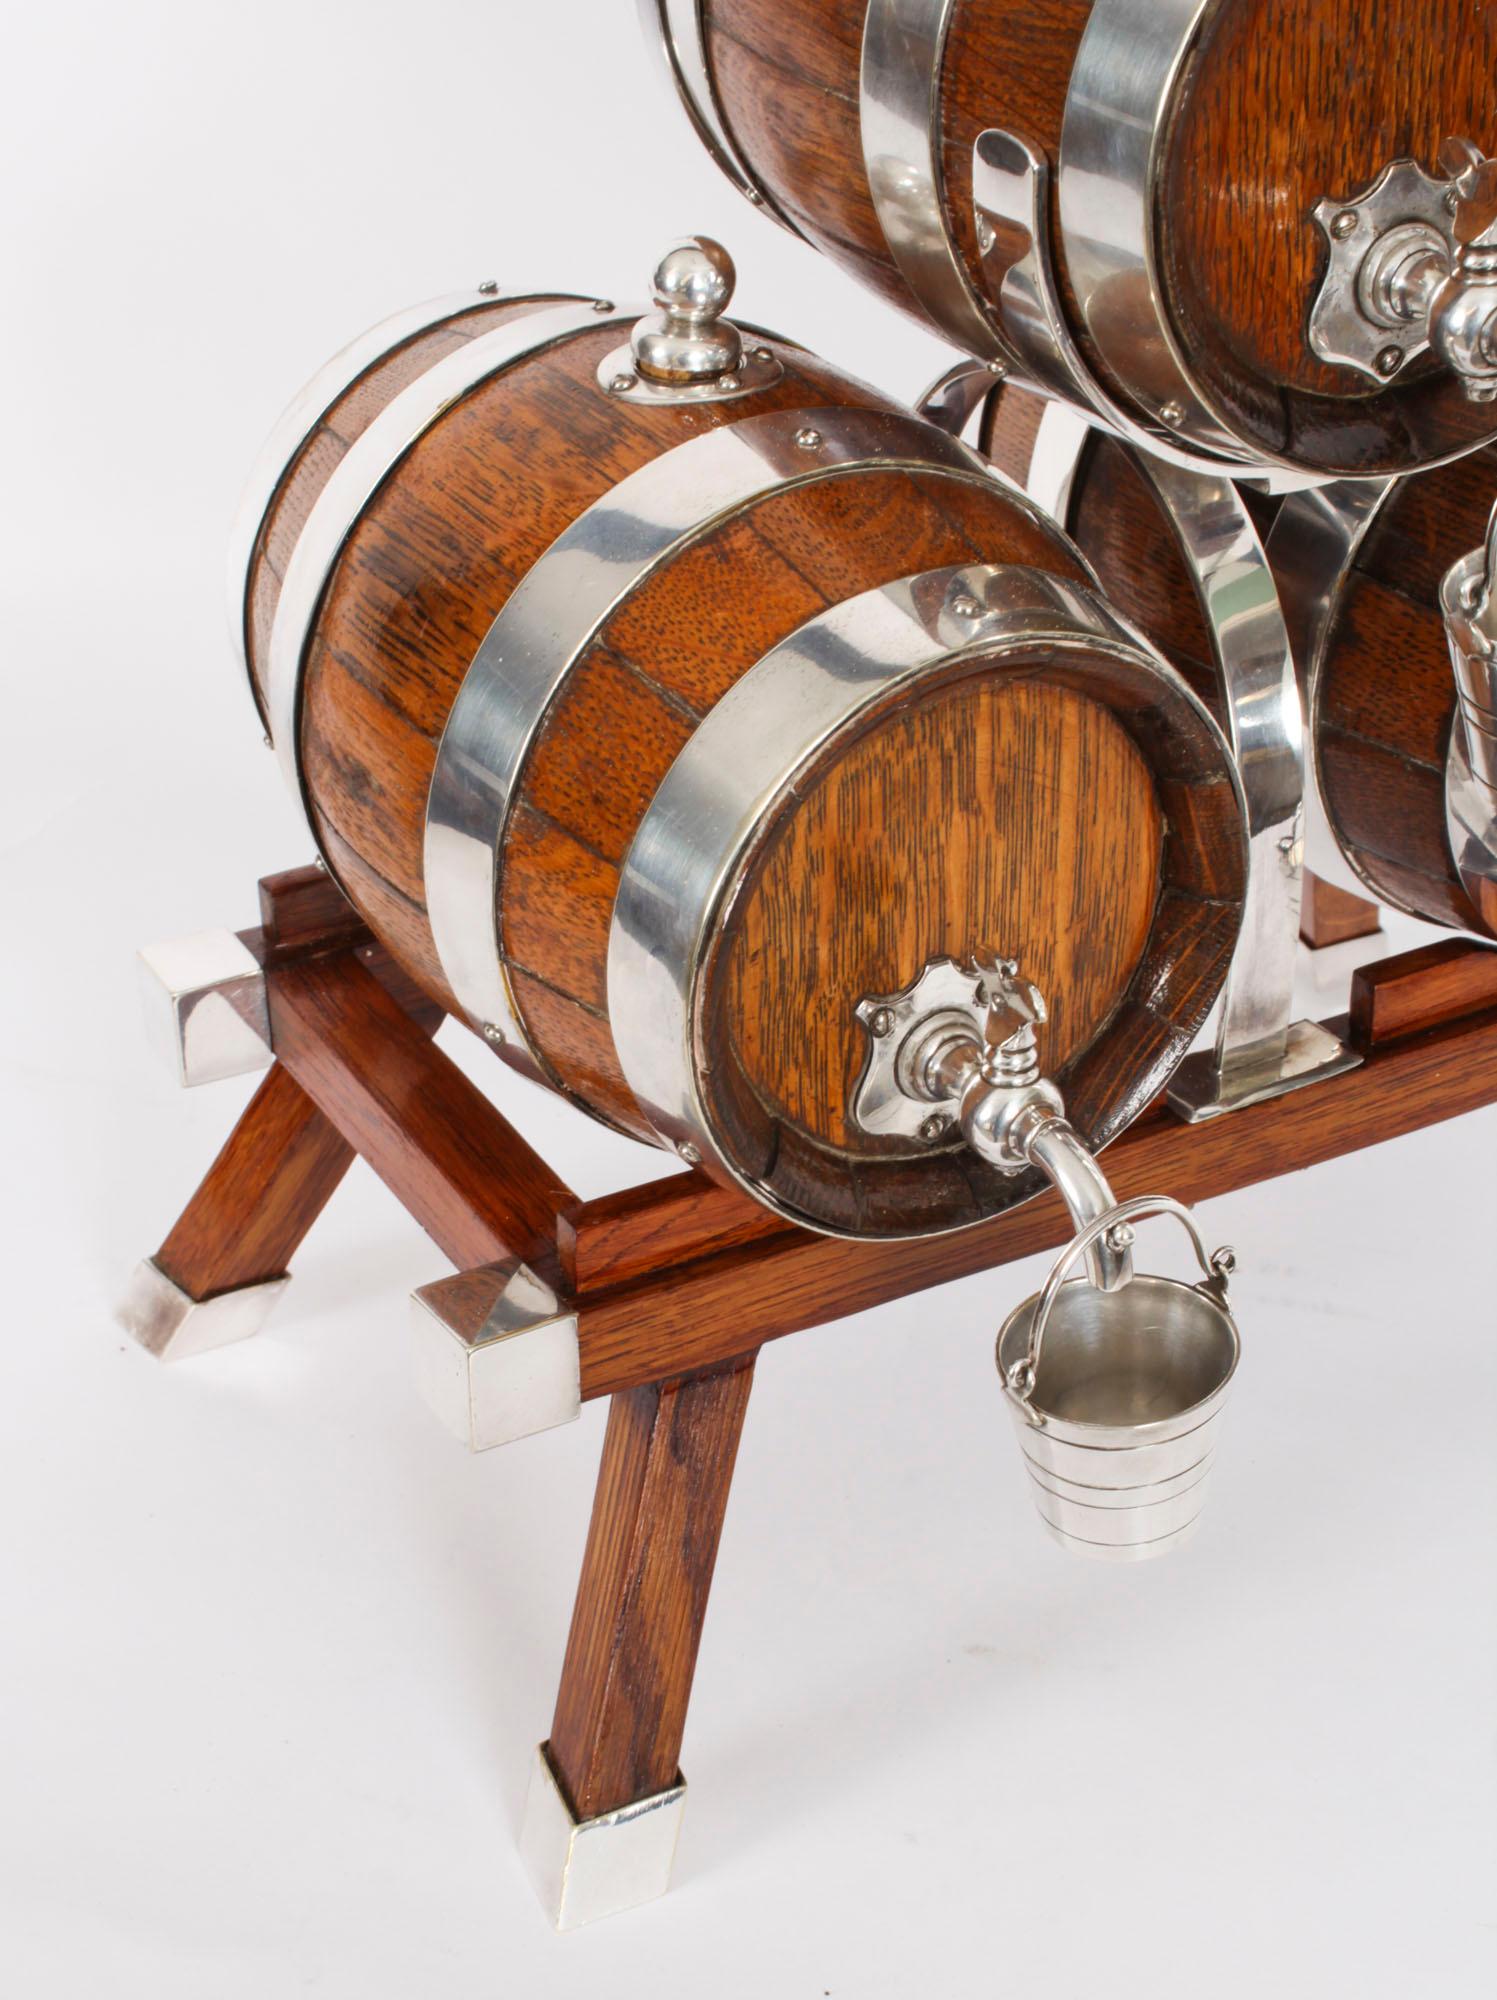 This is an elegant antique solid oak and silver plated three-barrel decanter set, circa 1880 in date. 

The oak trestle stand is formed as  three coopered oak barrels with silver plated straps and taps on an oak trestle stand with decorative